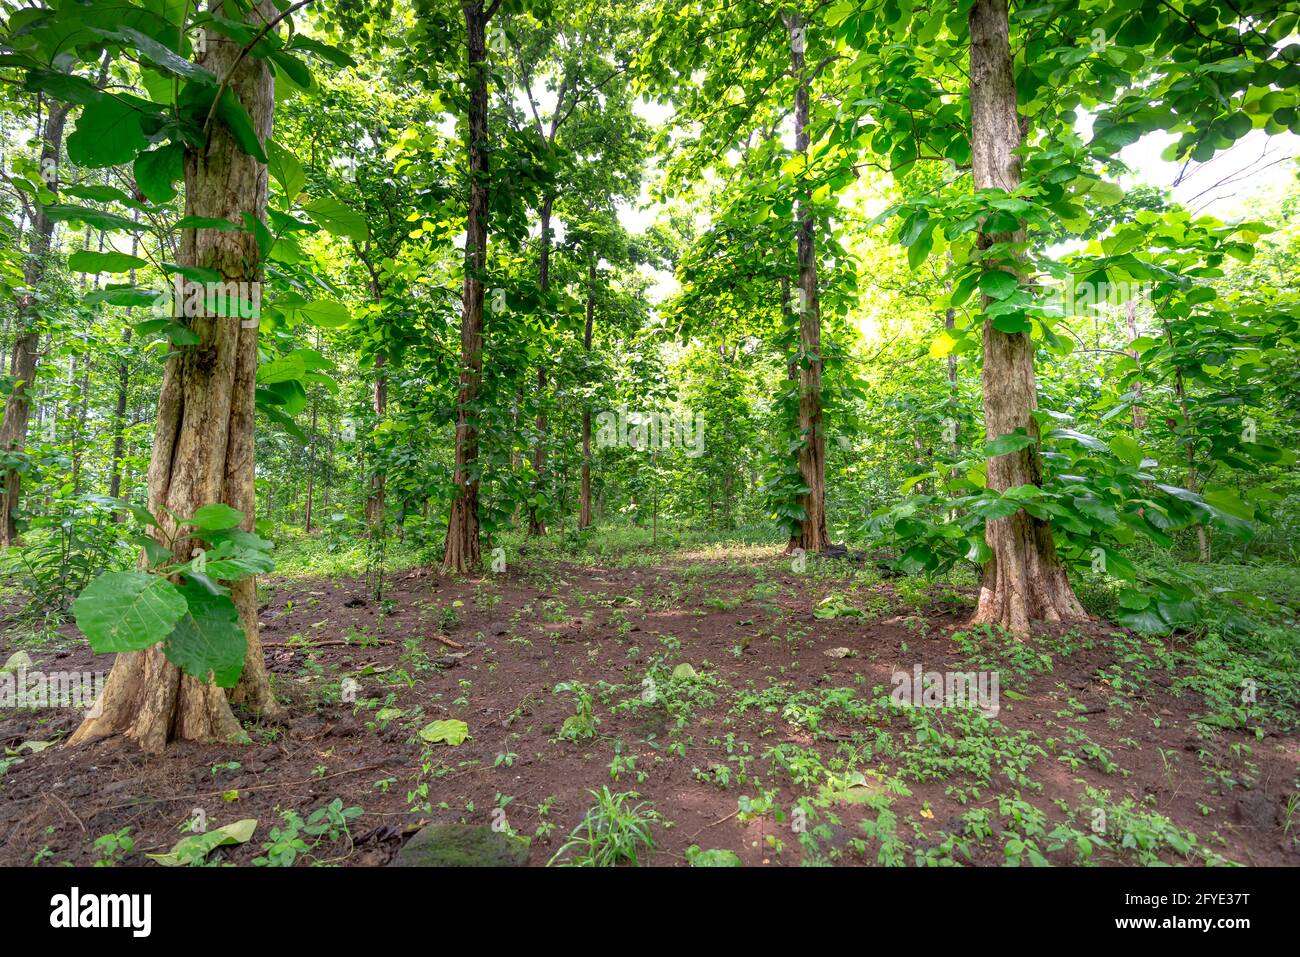 Teak Tree Forest (Tectona grandis). This tree has a wide elliptical leaf. The tree can be tall and large. Stock Photo